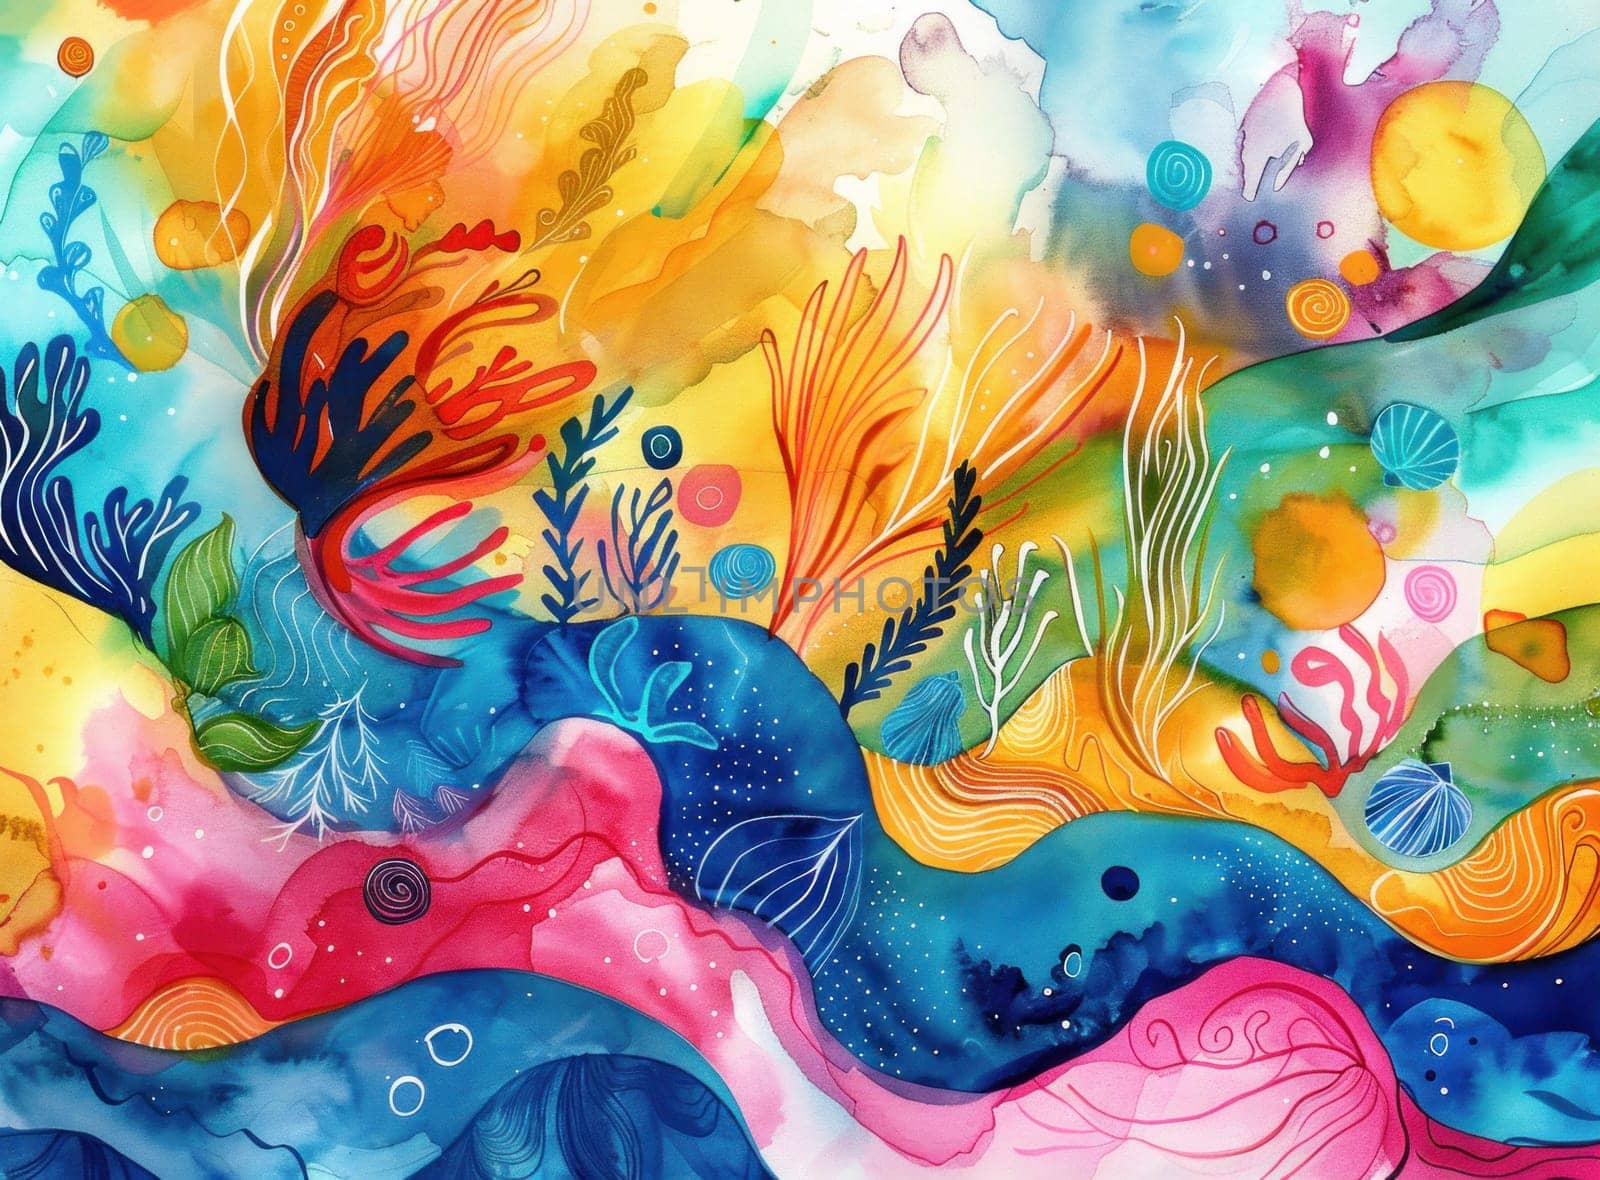 Colorful ocean scene with coral and marine life, inspired by art and travel themes